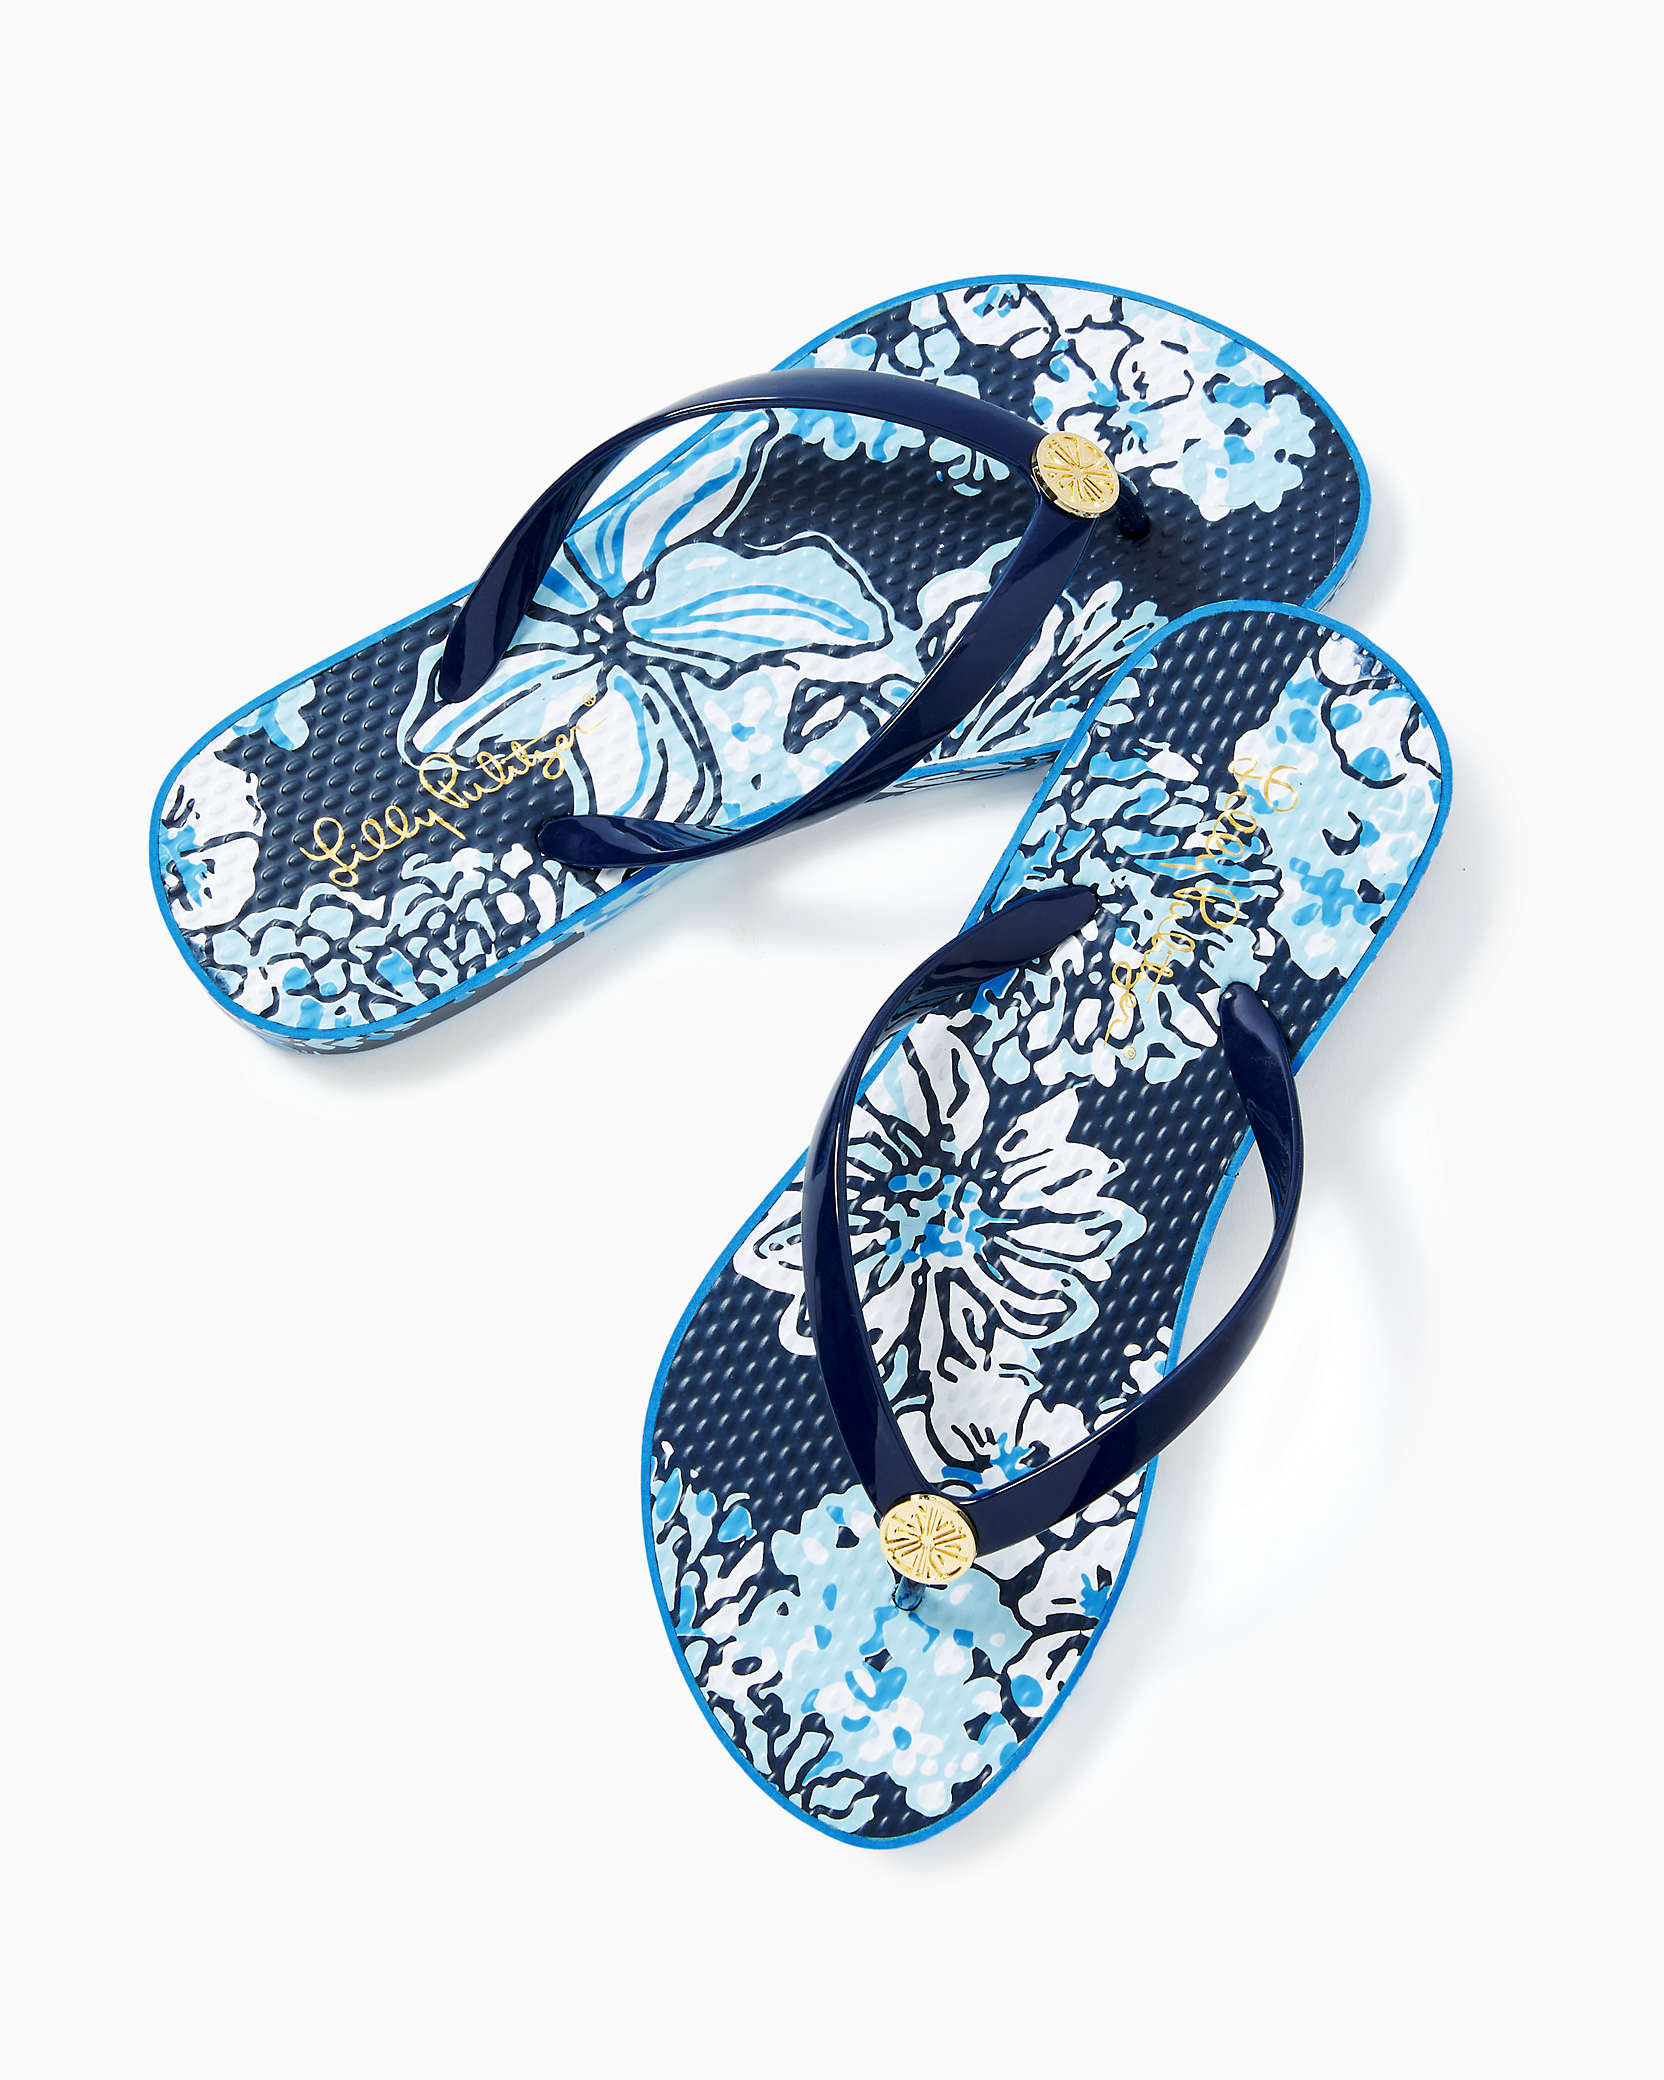 Shop Lilly Pulitzer Pool Flip Flop In Low Tide Navy Bouquet All Day Shoe